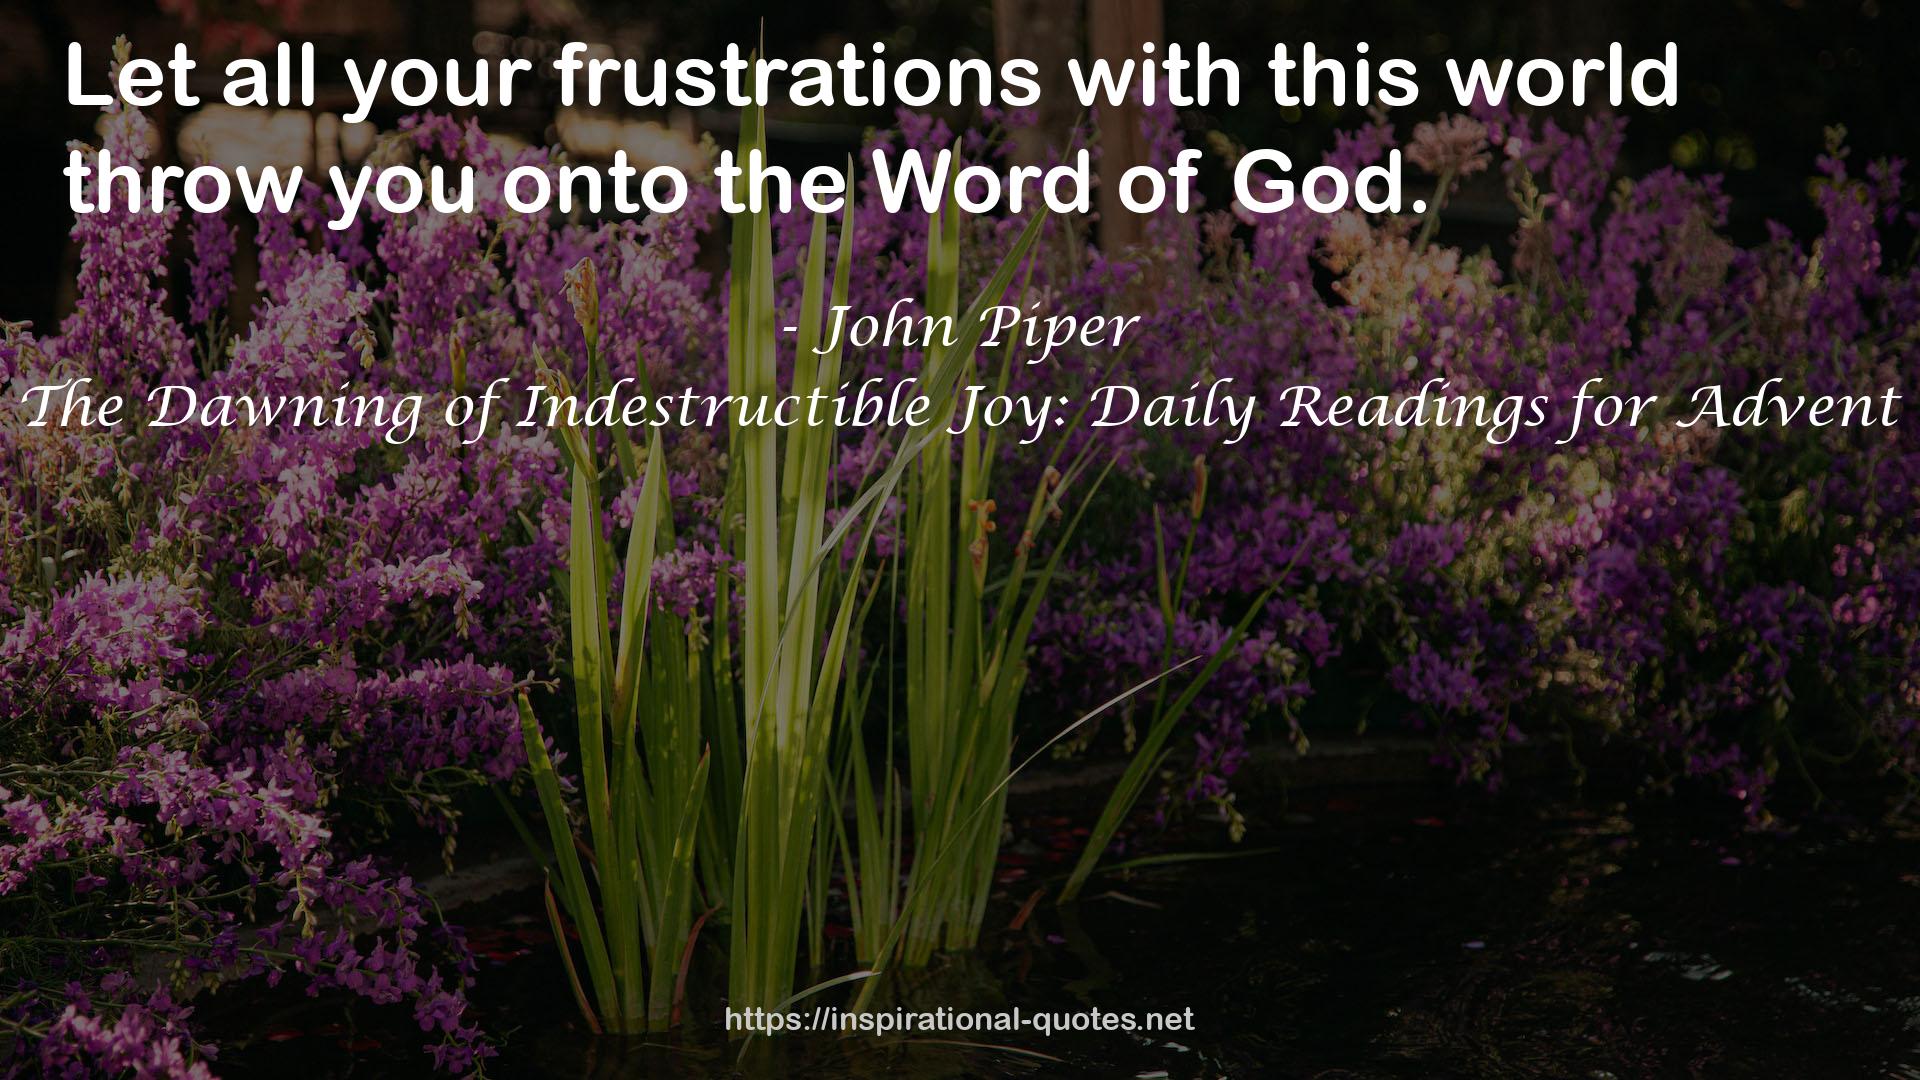 The Dawning of Indestructible Joy: Daily Readings for Advent QUOTES